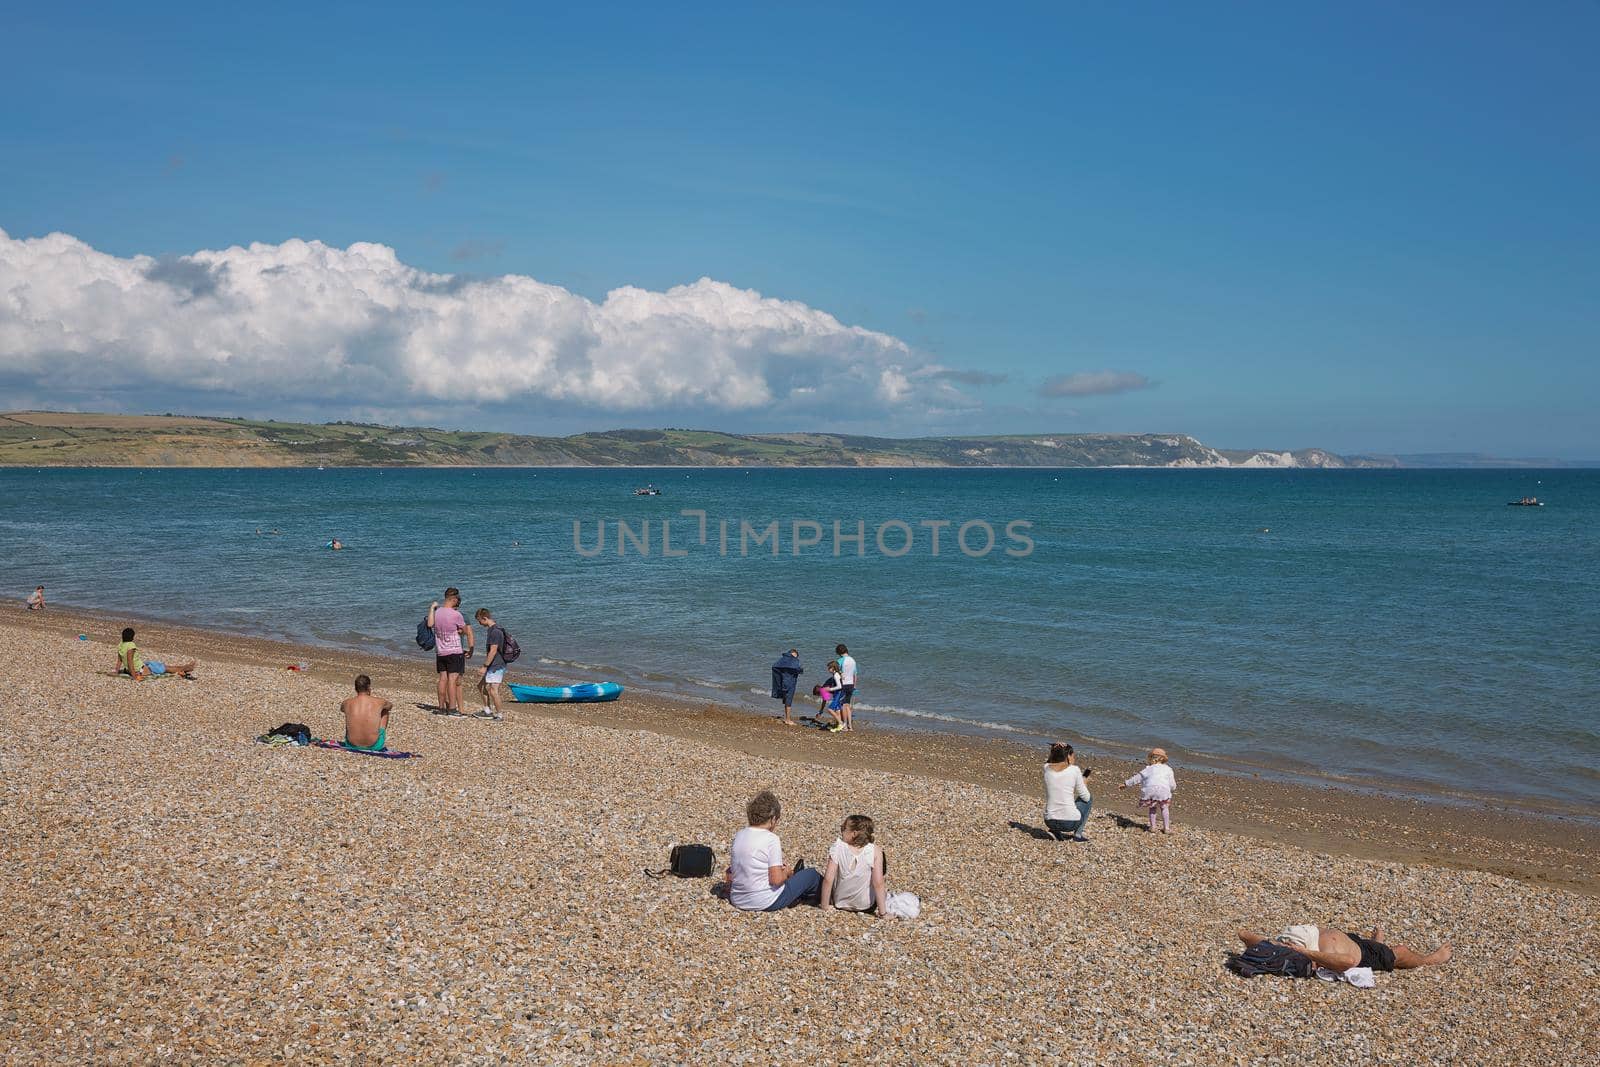 WEYMOUTH, DORSET, ENGLAND, UK - AUGUST 15, 2017: People and tourists enjoying sunny summer day at the beach in Weymouth, Dorset, UK